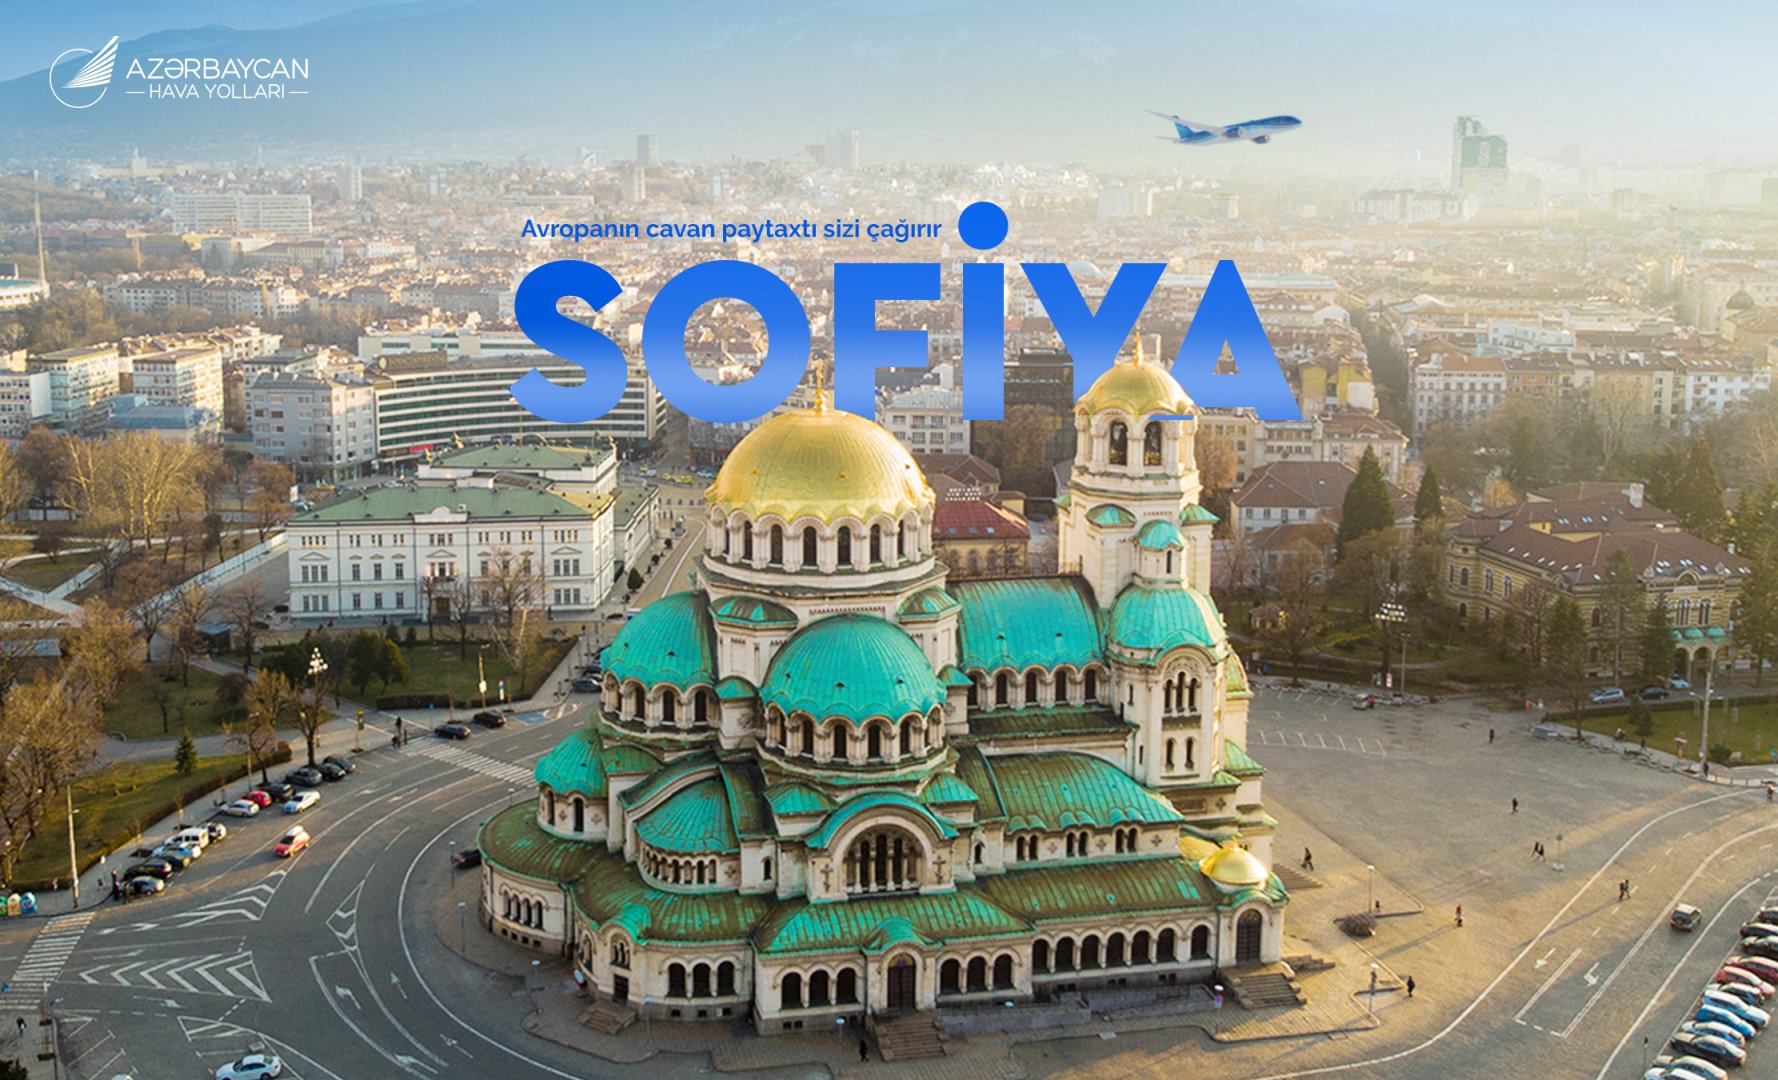 AZAL launches ticket sales for flights from Baku to Sofia